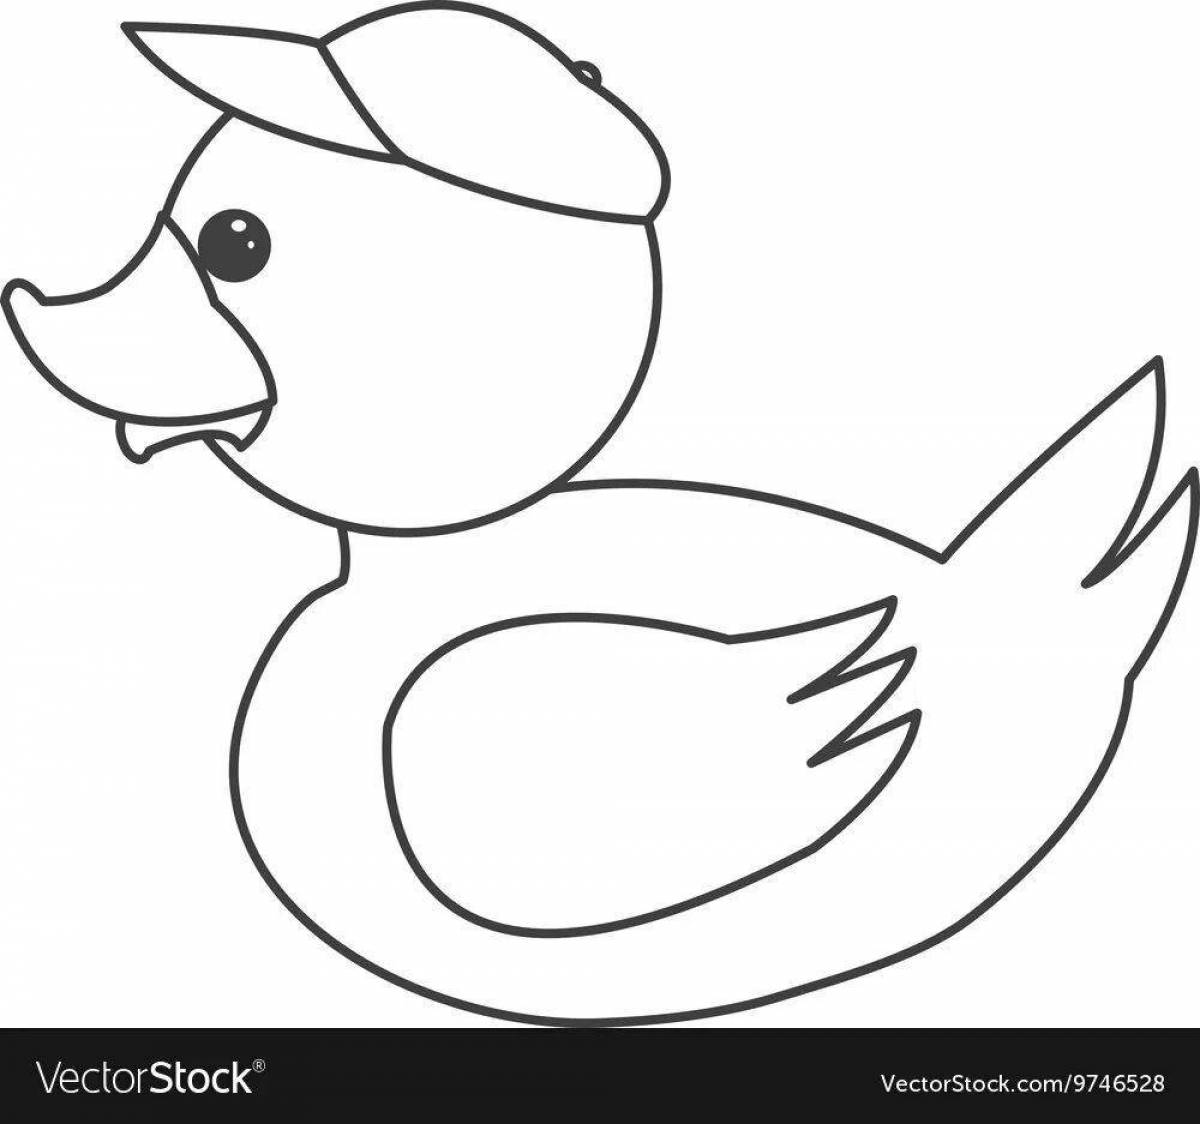 Incredible Dymkovo toy duck coloring book for kids